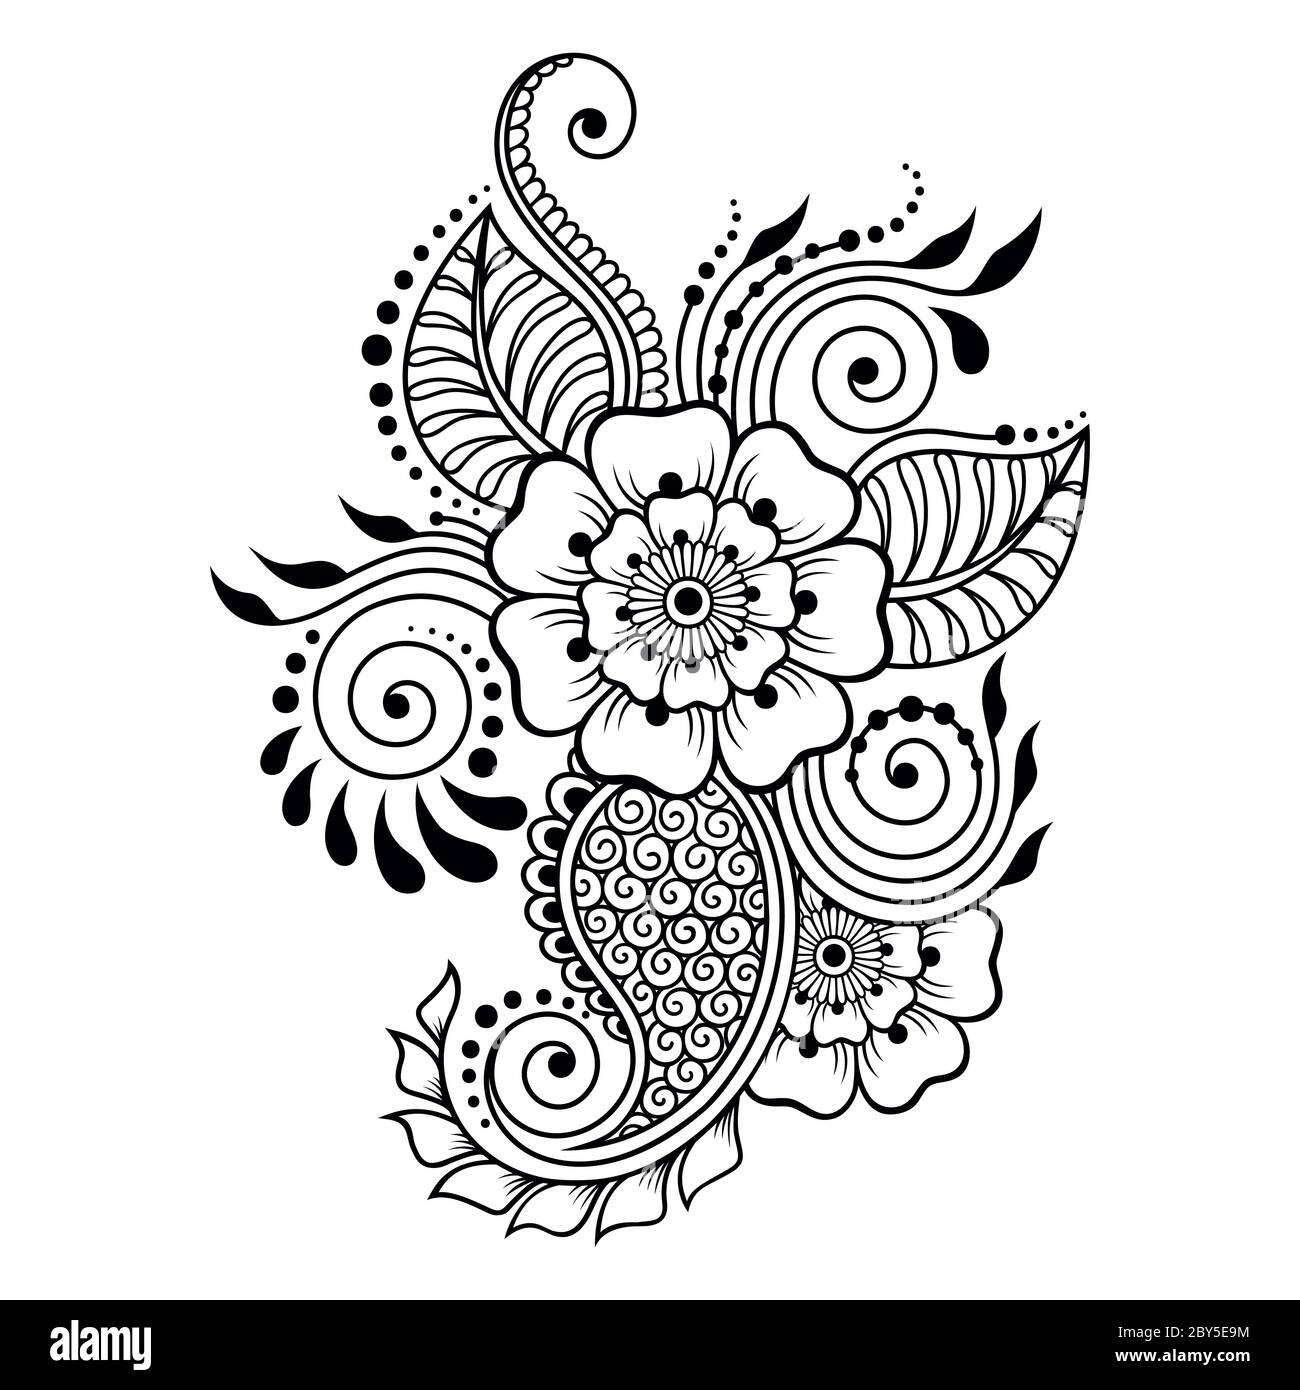 Drawing of peacock for henna mehndi tattoo Vector Image